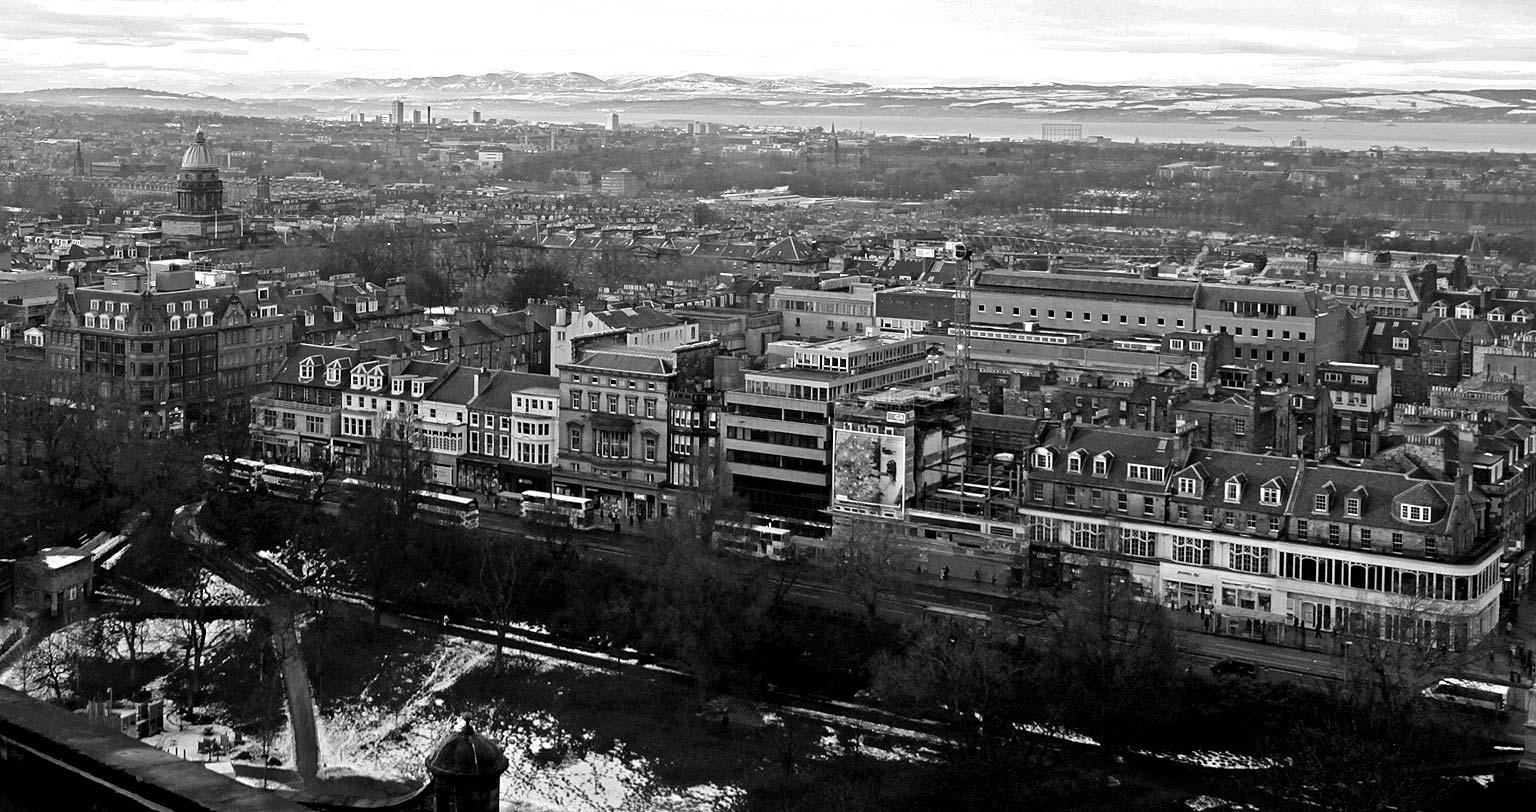 View to the NW from Edinburgh Castle  -  December 2010